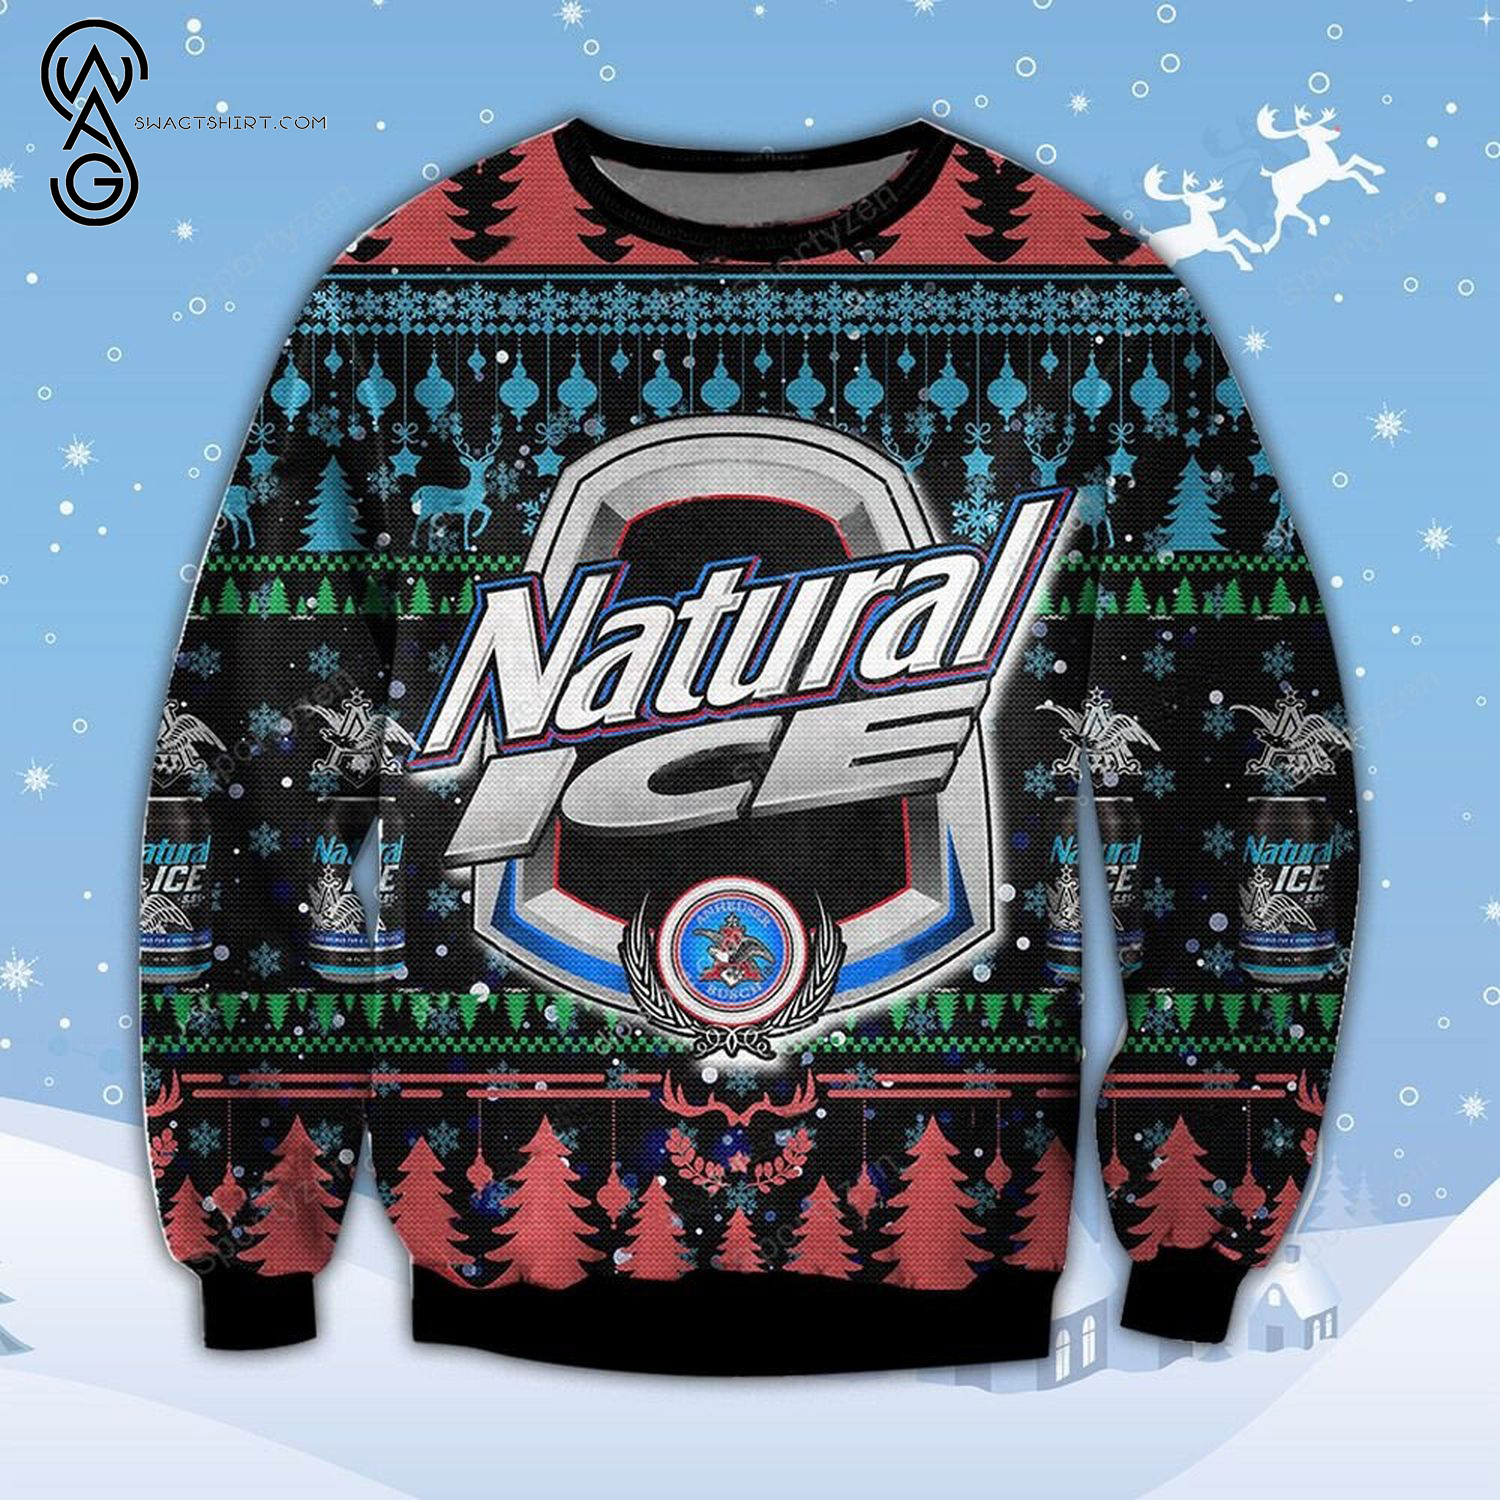 Natural Ice Beer Full Print Ugly Christmas Sweater